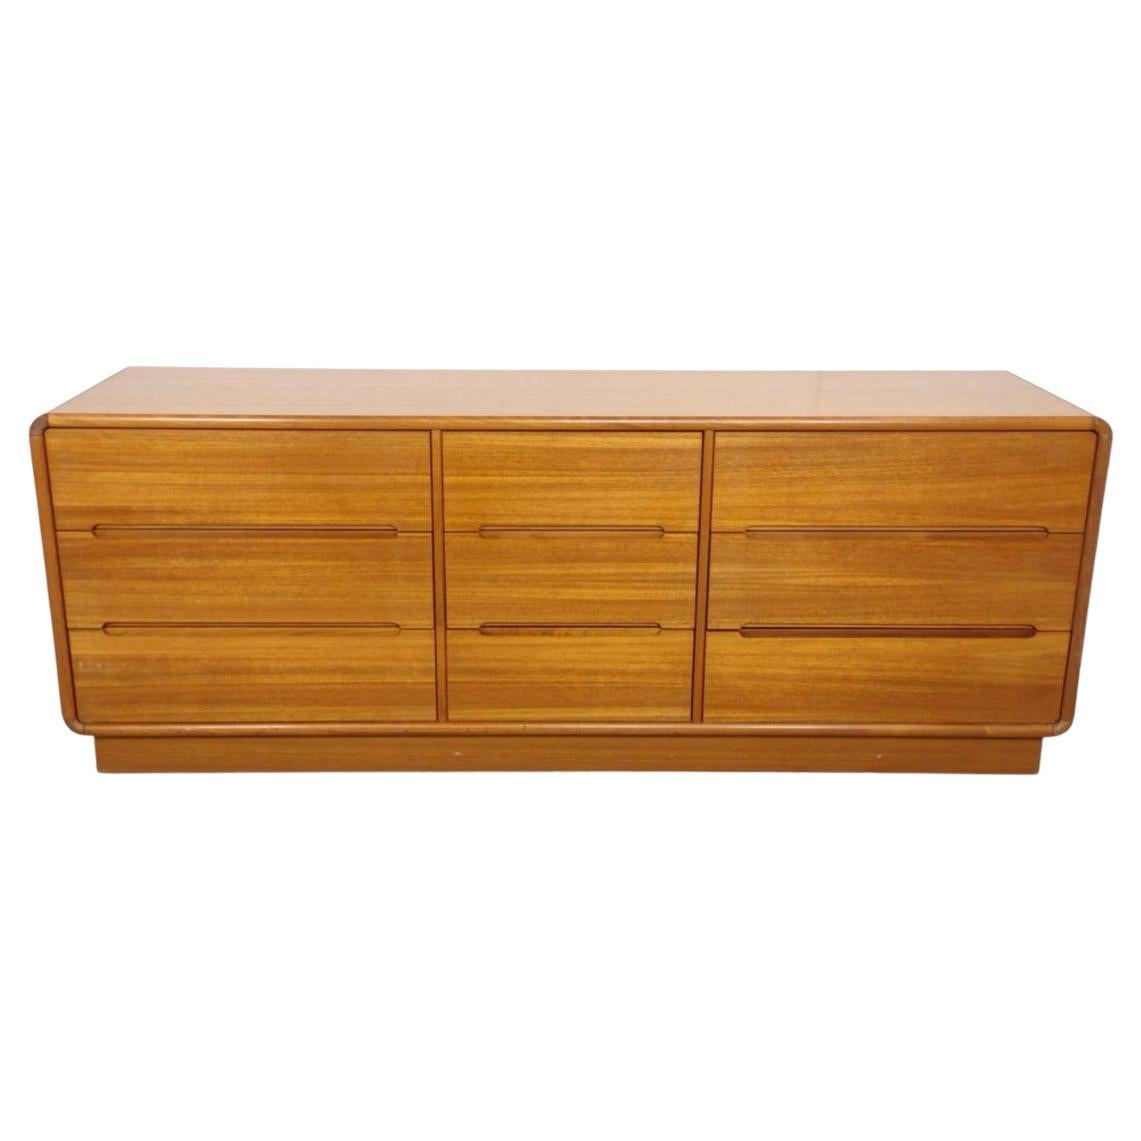 Mid century Danish modern 9 drawer teak dresser or credenza rounded corners. Very clean inside and out. Beautiful design - no labels - Back of this Dresser is finished. All drawers slide smooth. Made in Denmark. Located in Brooklyn NYC.

Measures: